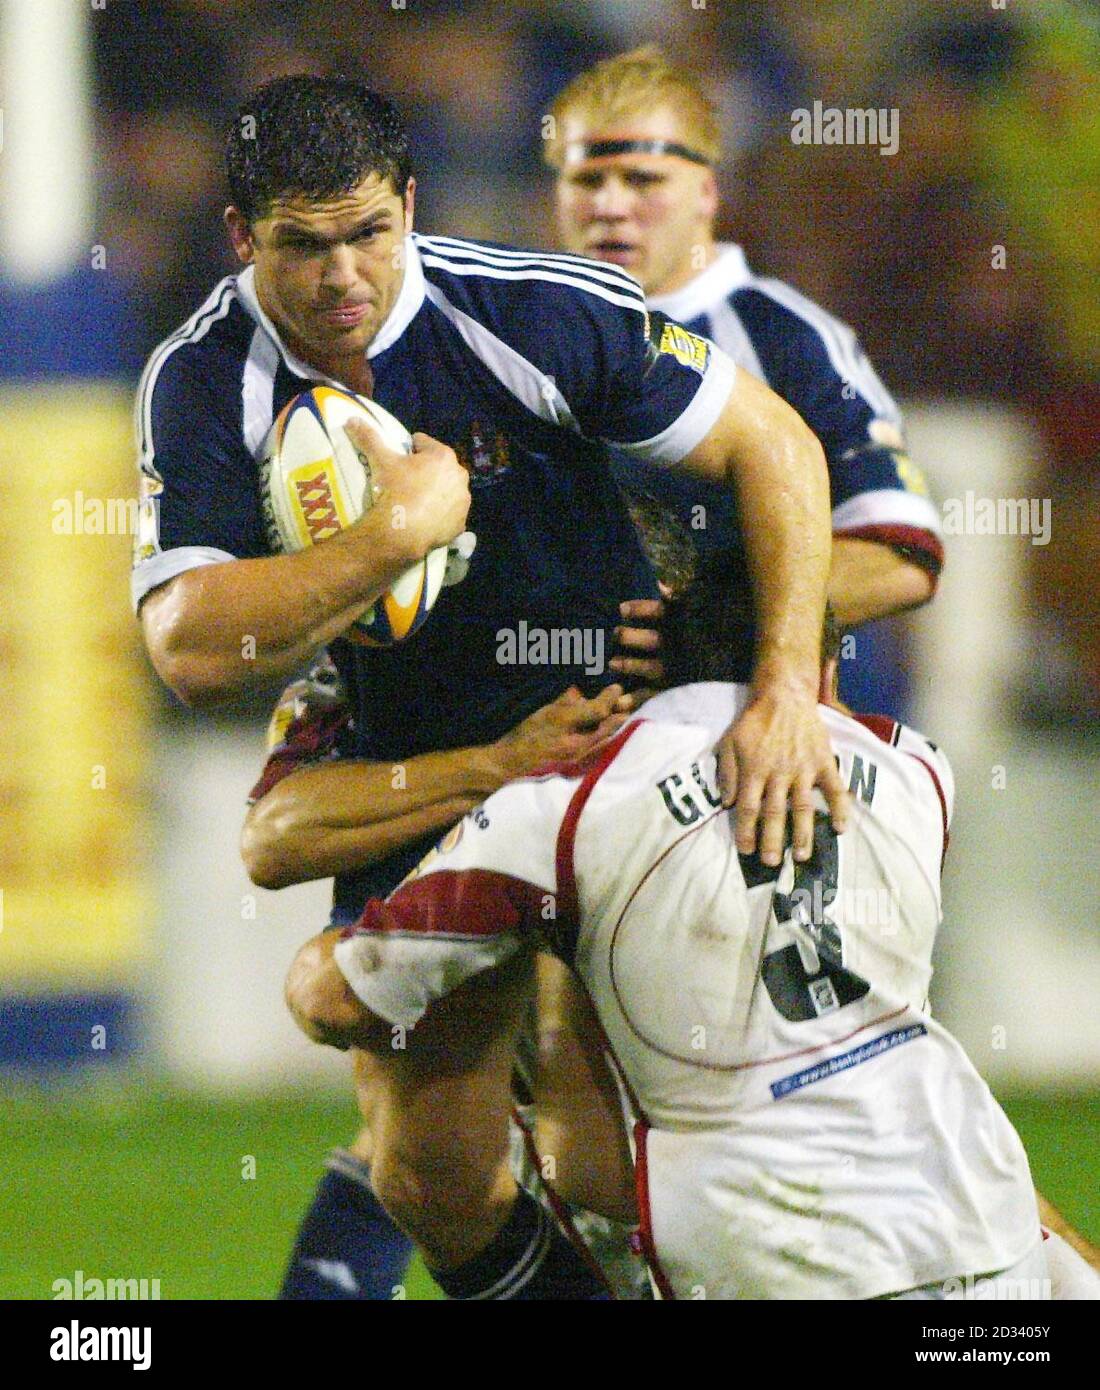 Wigan Warriors' Andy Farrell (left) is tackled by St Helens' Martin Gleeson during the Tetley's Super League semi-final match at Knowsley Road. Stock Photo